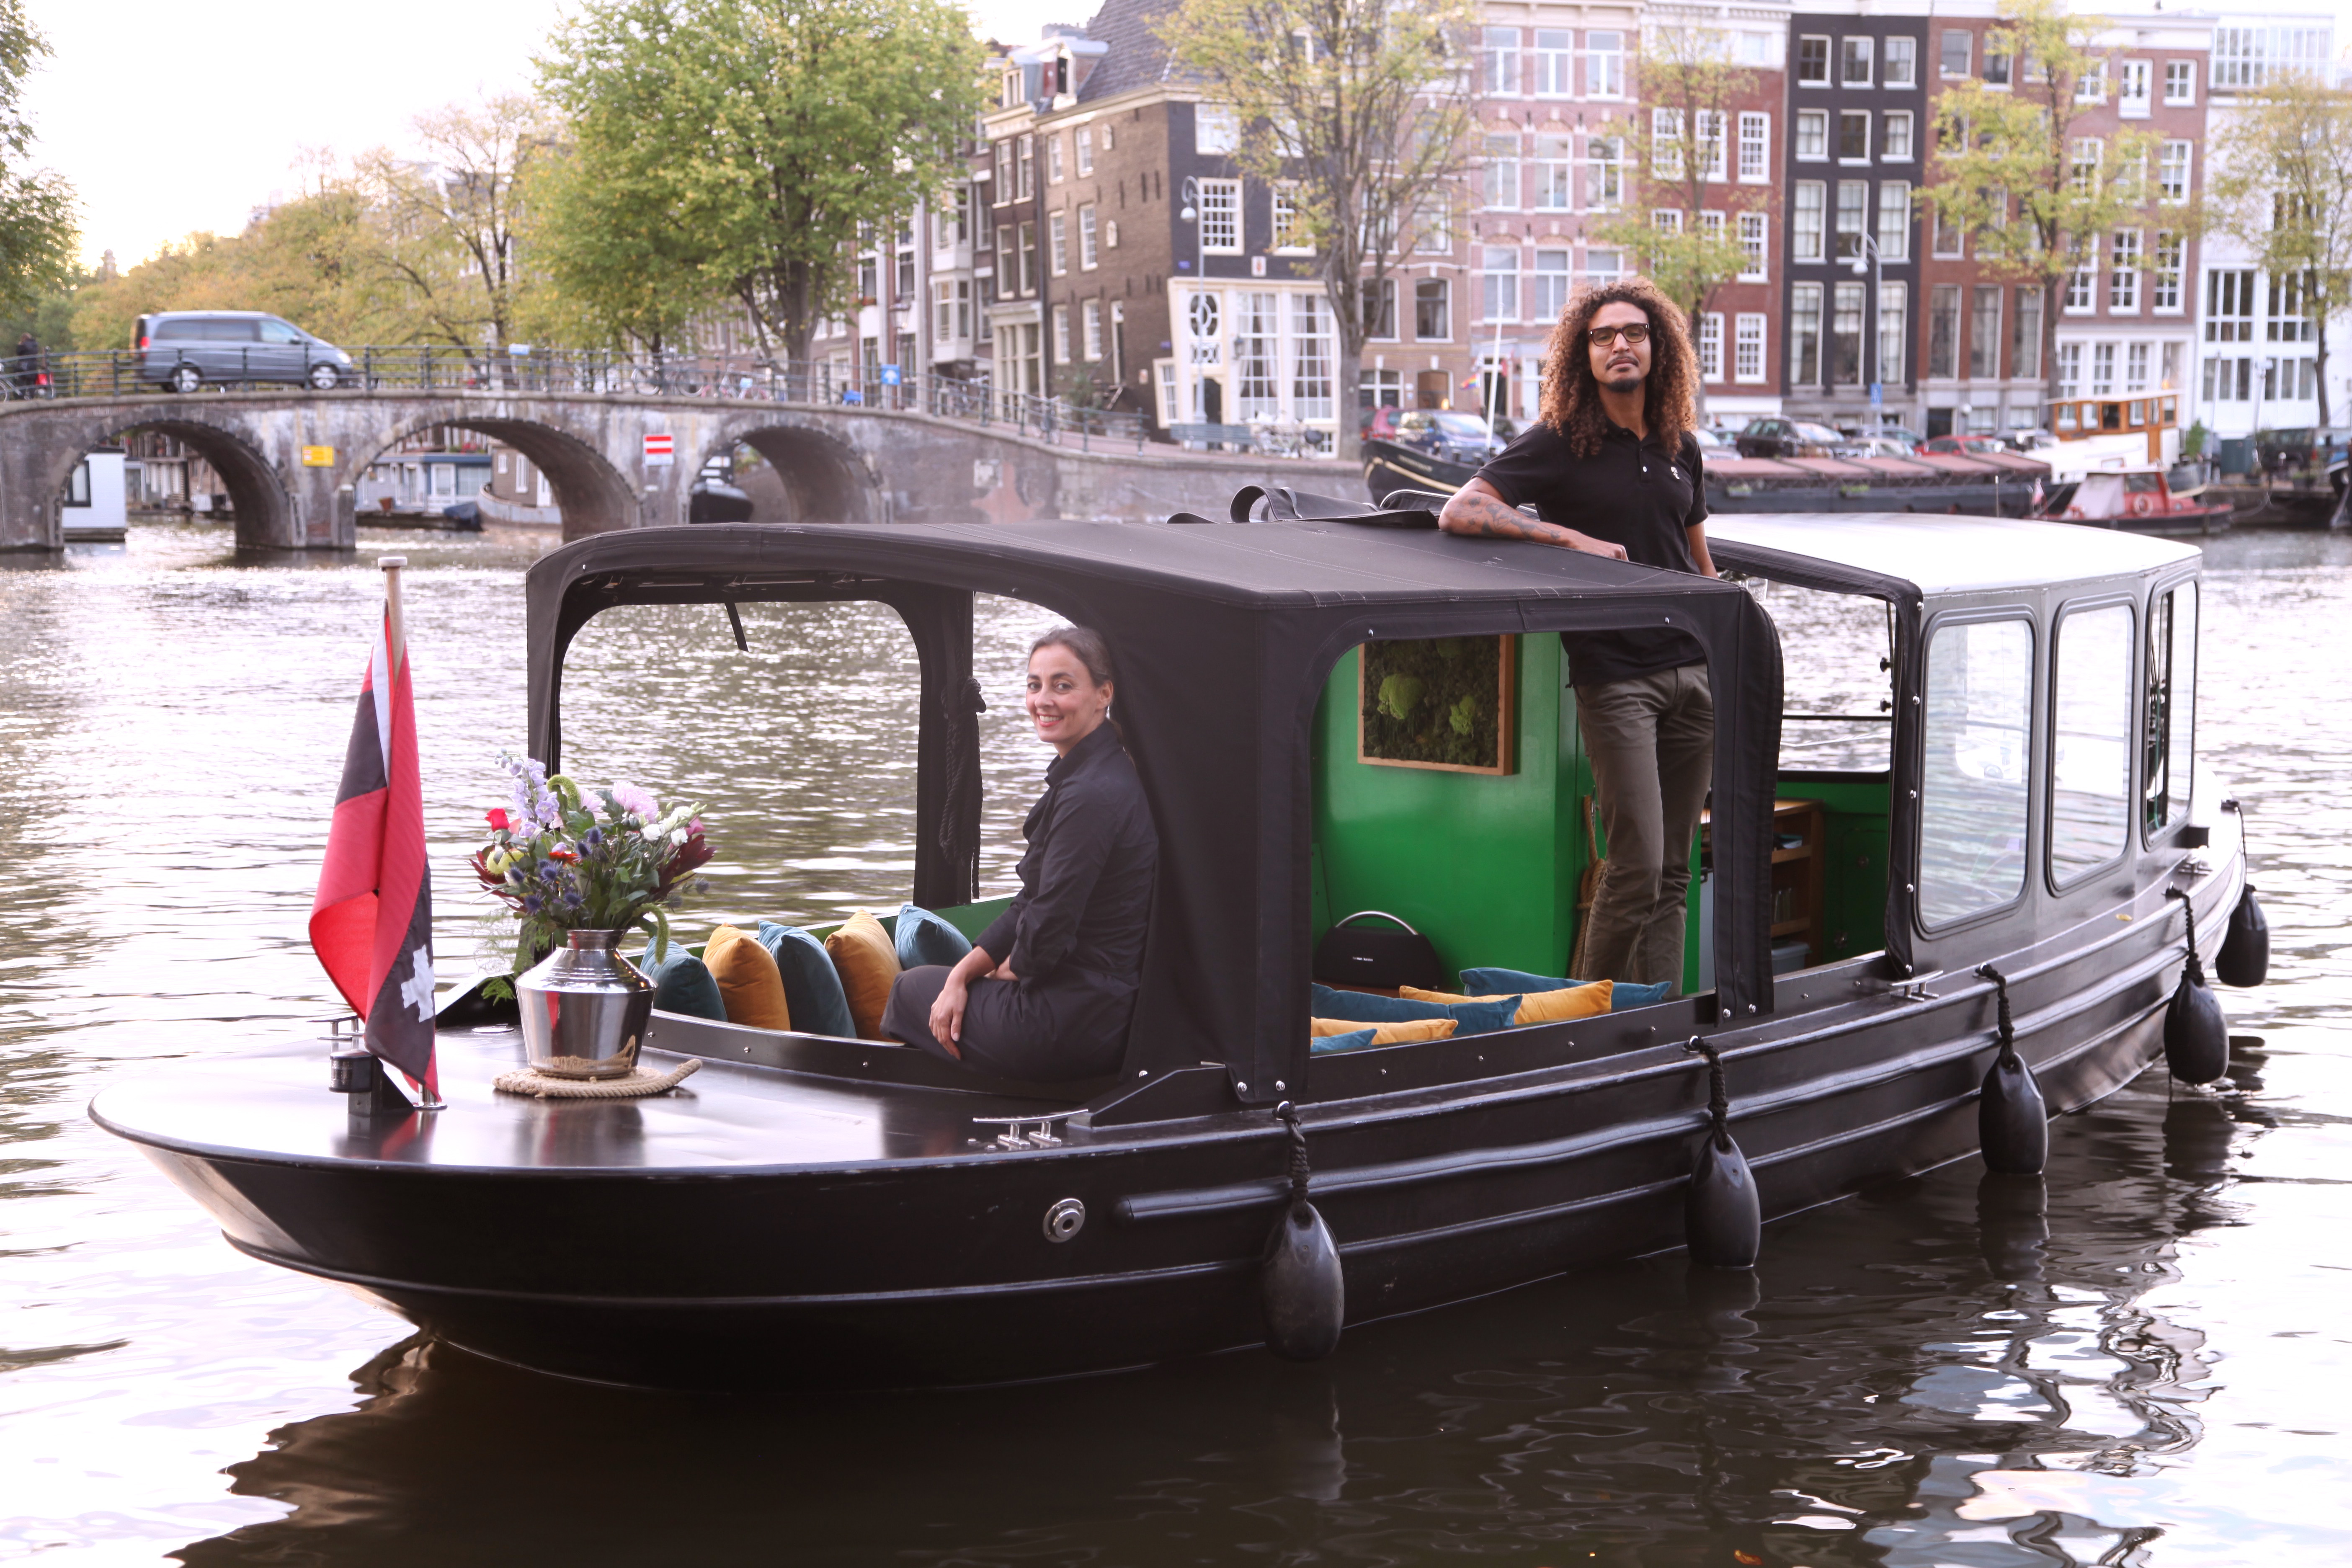 Our boat cruising through the canals of Amsterdam